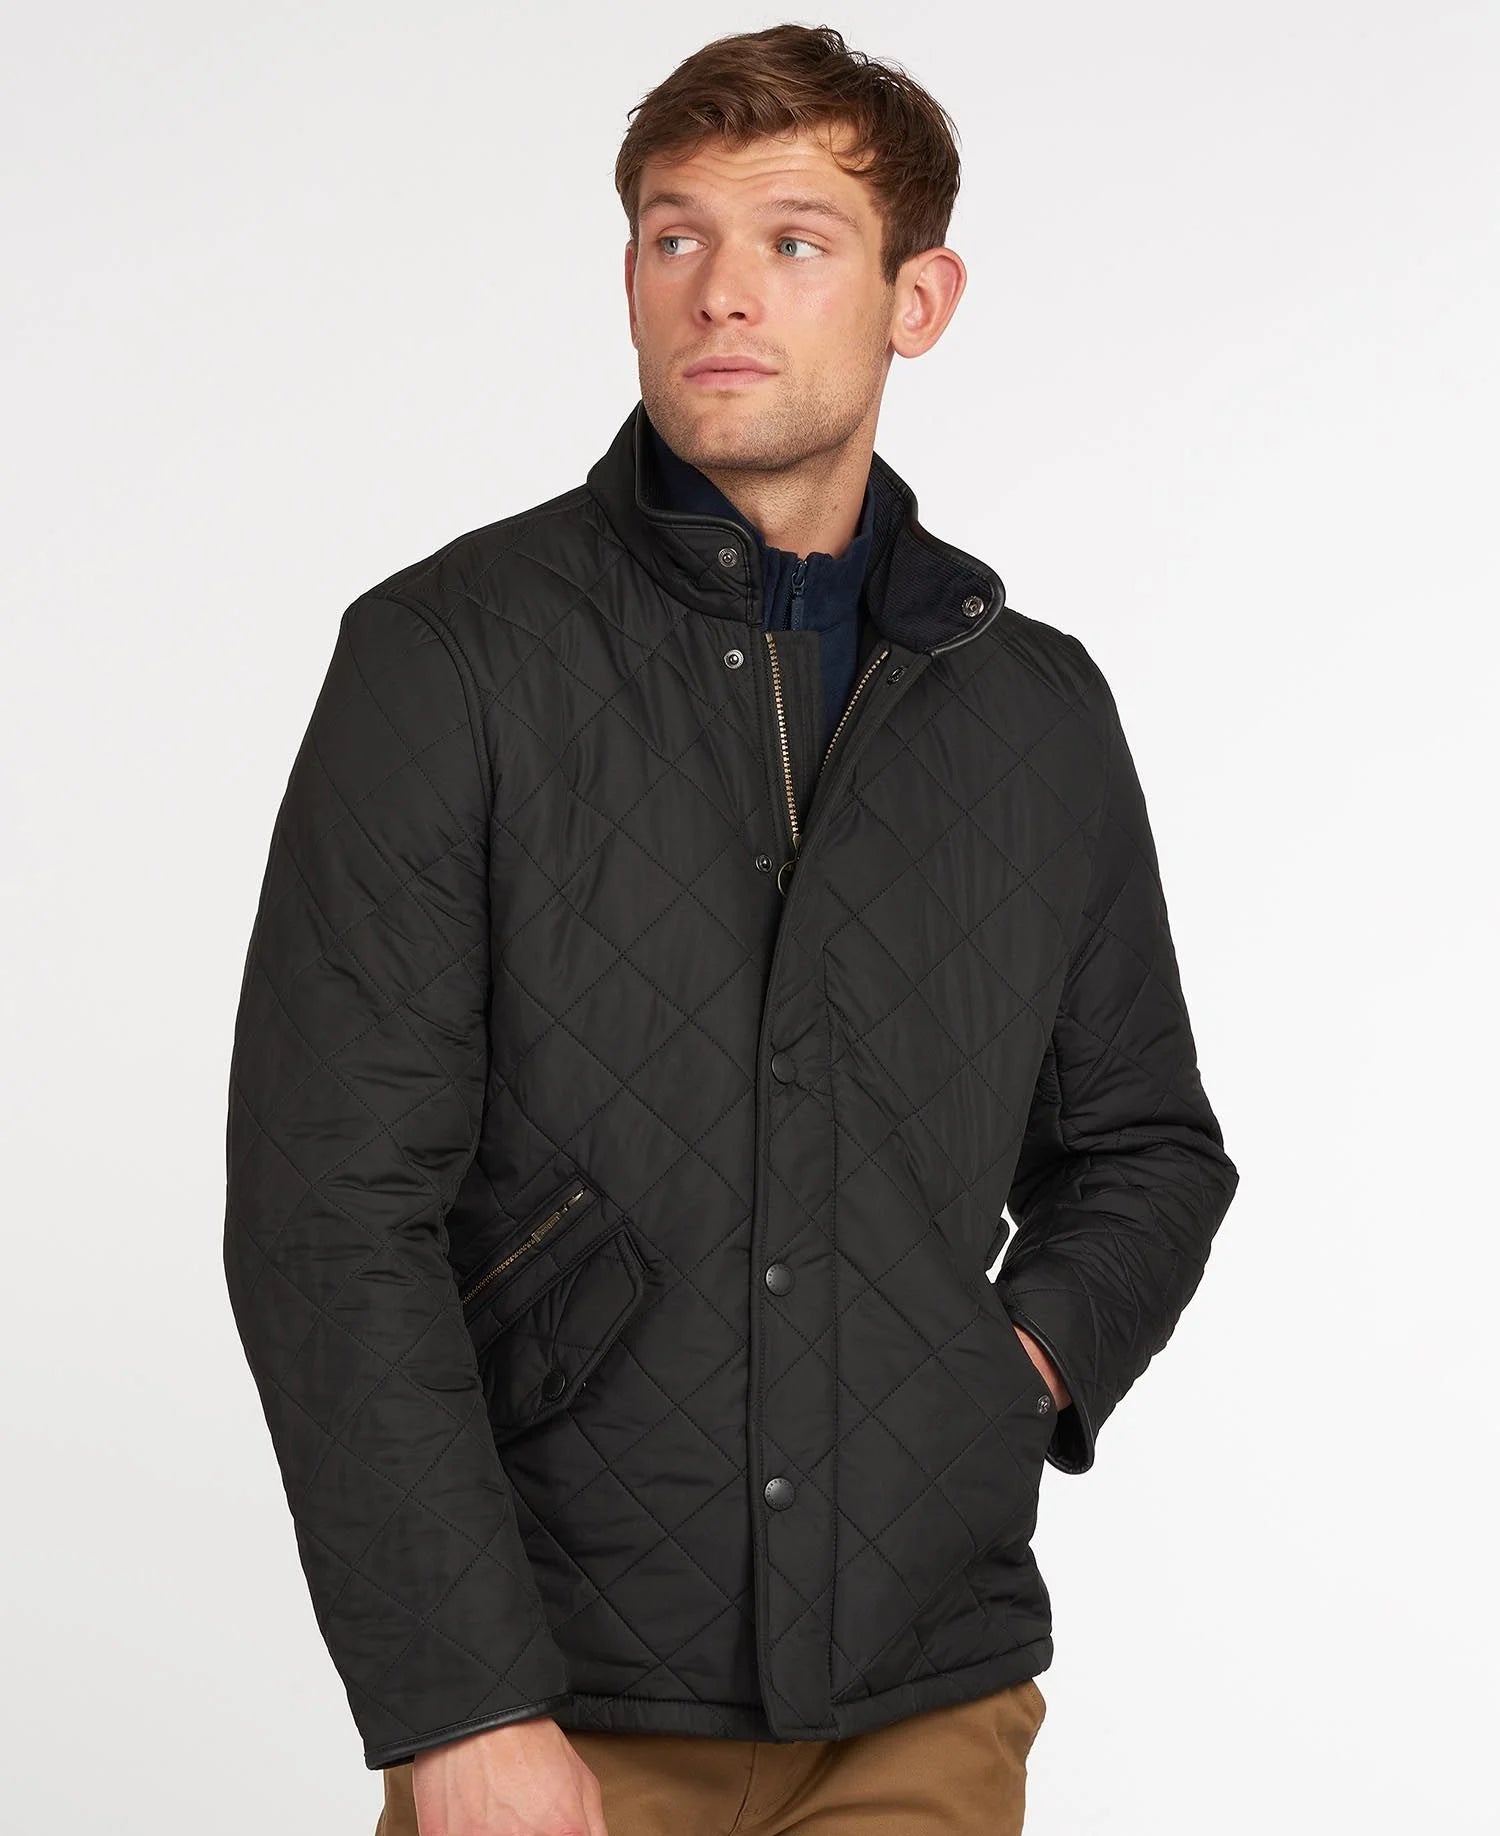 Barbour Powell Quilted Jacket Black